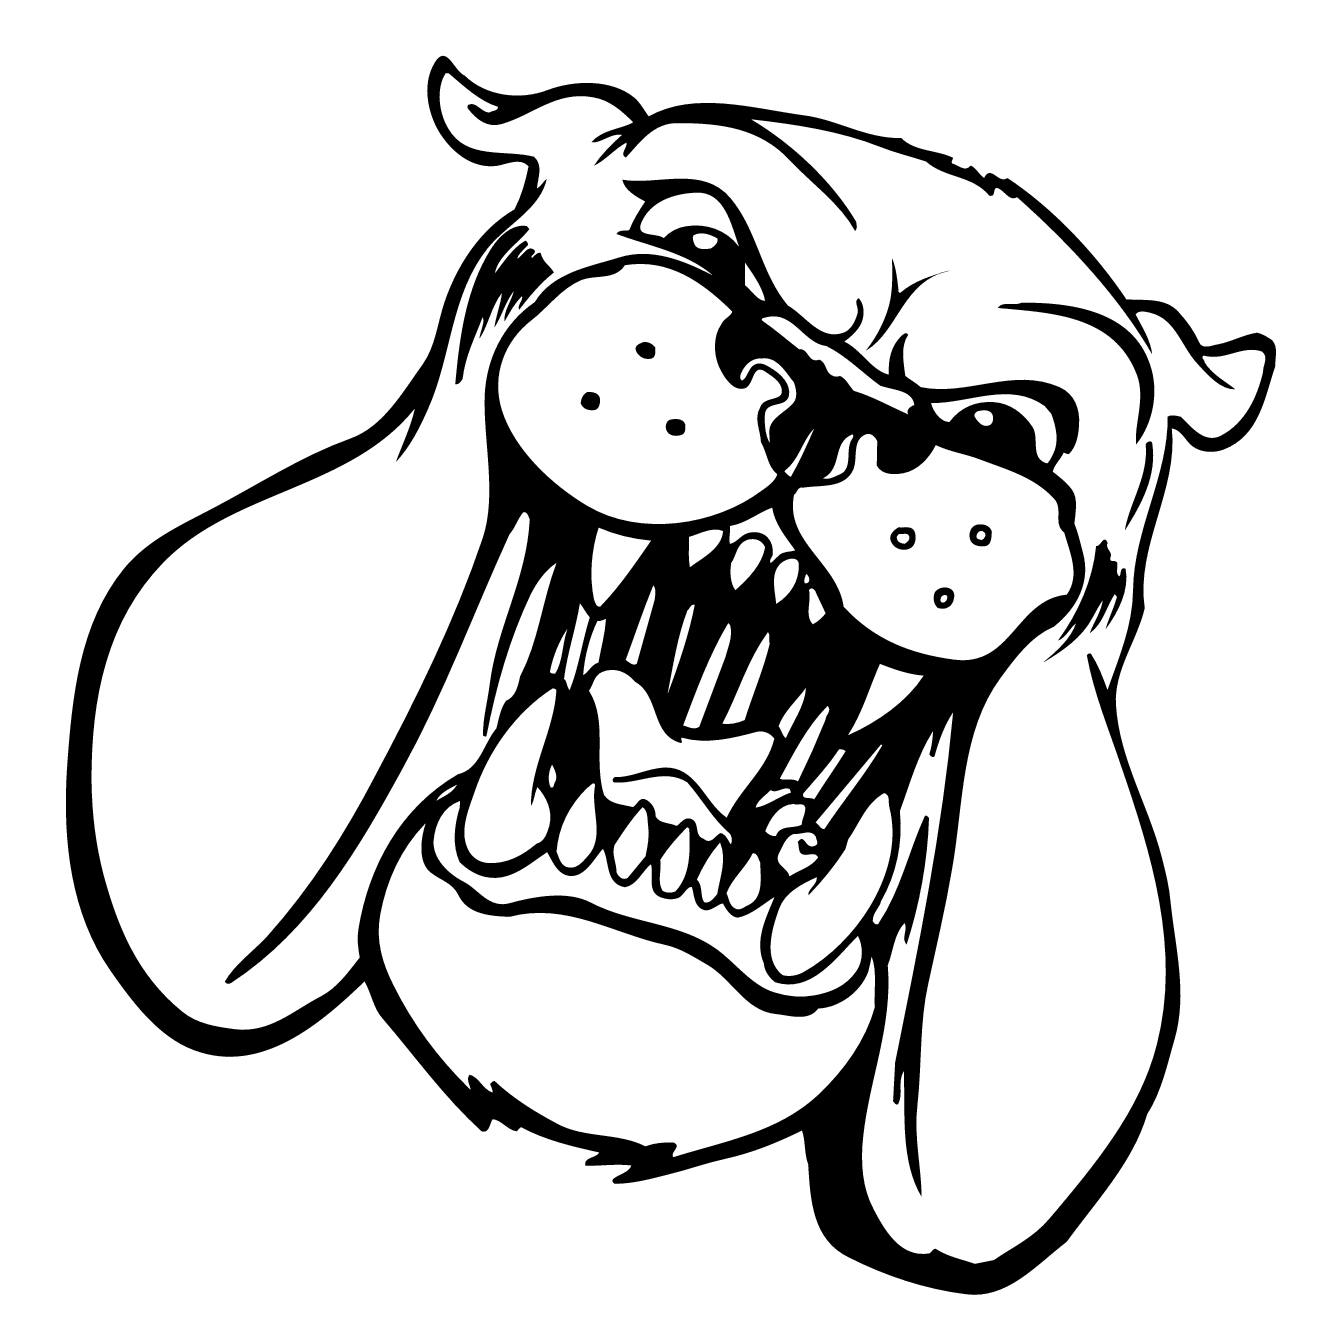 Bulldog clipart black and white free clipart images 2